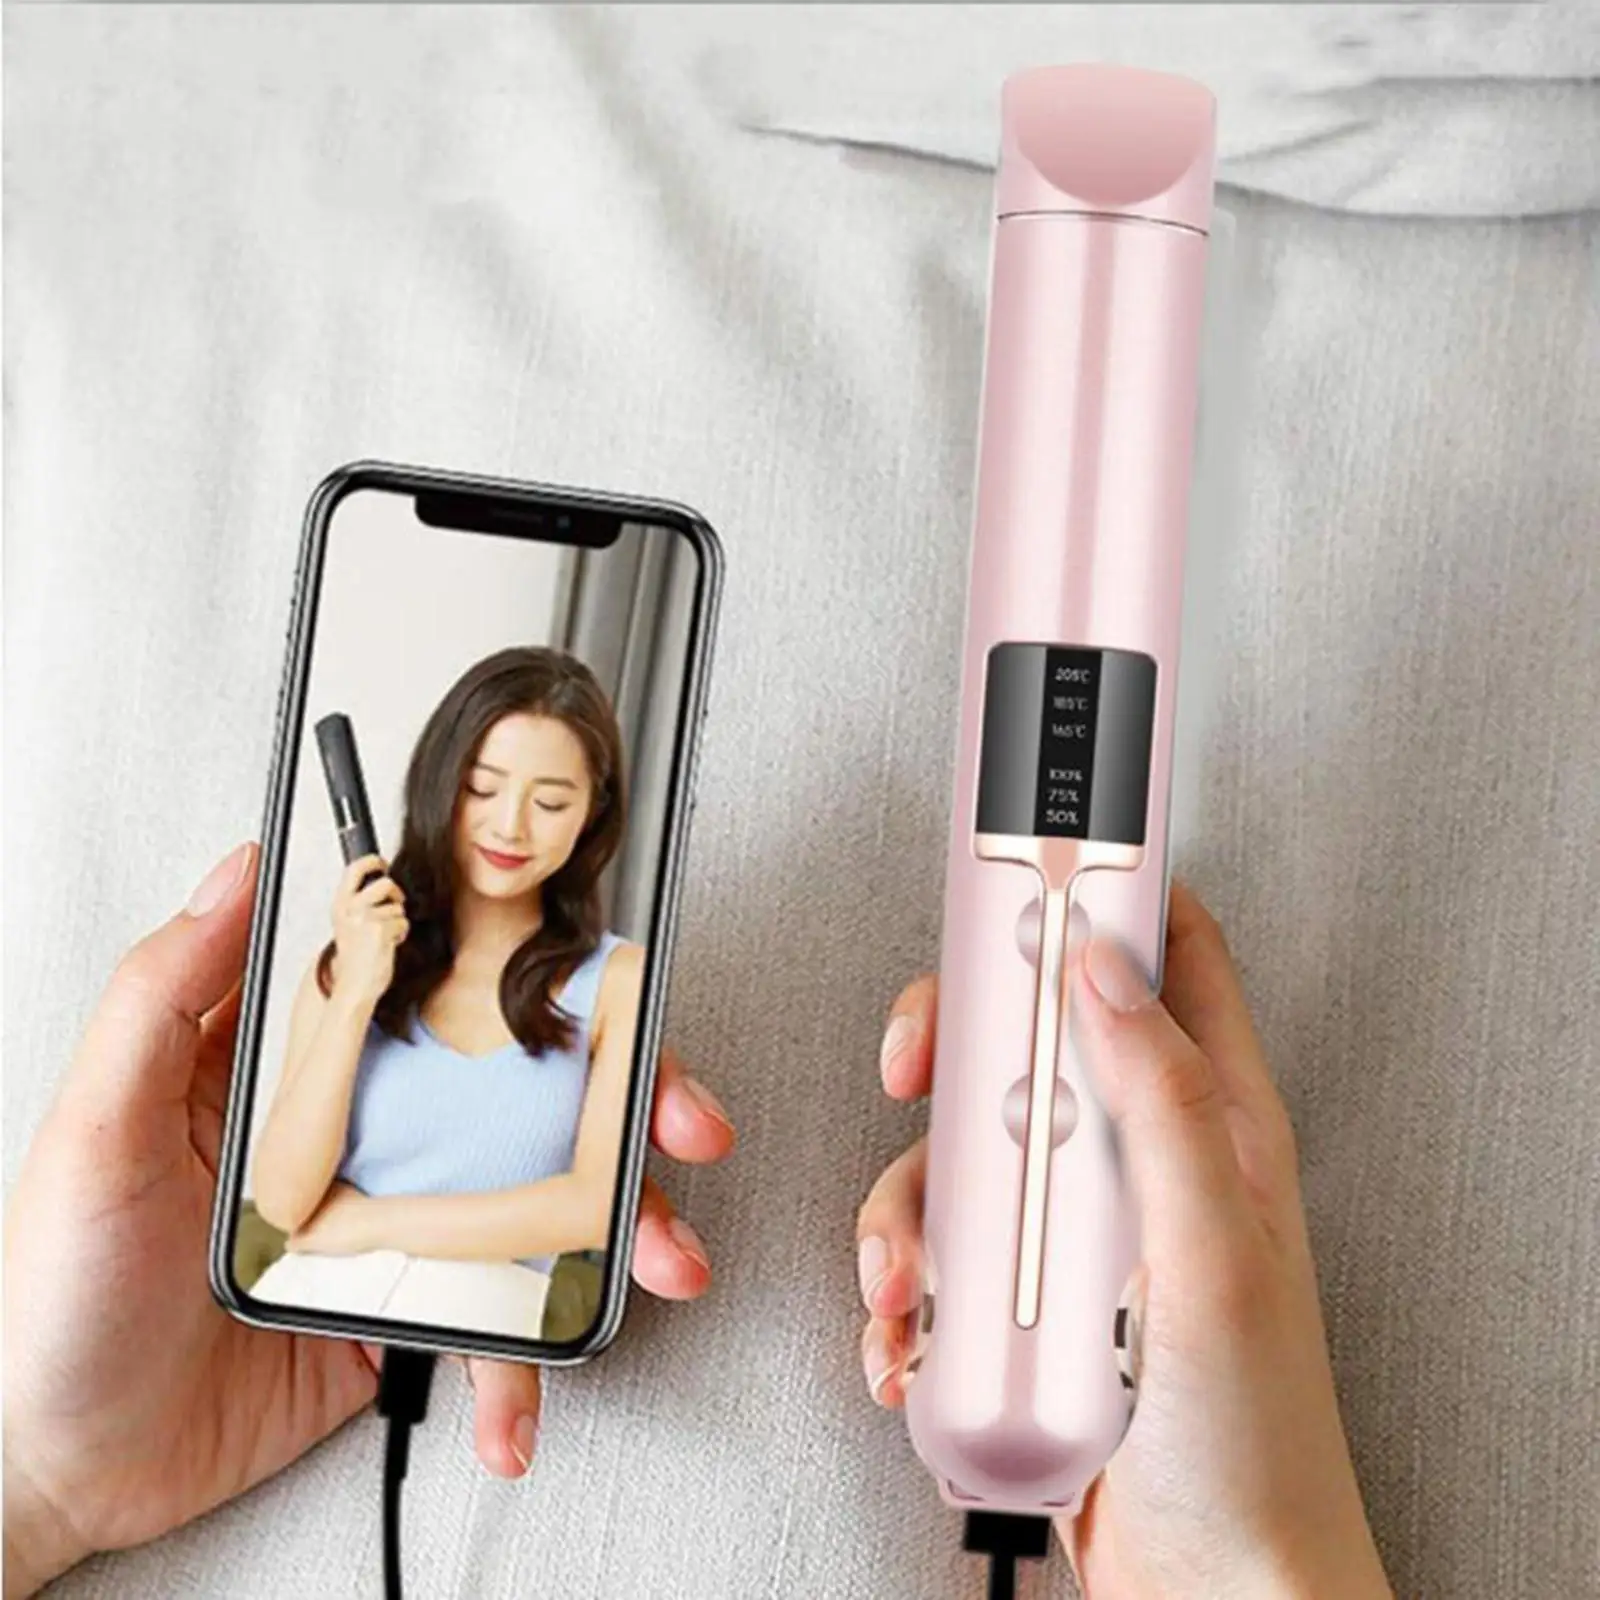 Compact Cordless Hair Curler Straightener 3-Level Temp Automatic USB Charging Power Bank for Salon Hair Straightening Curls DIY